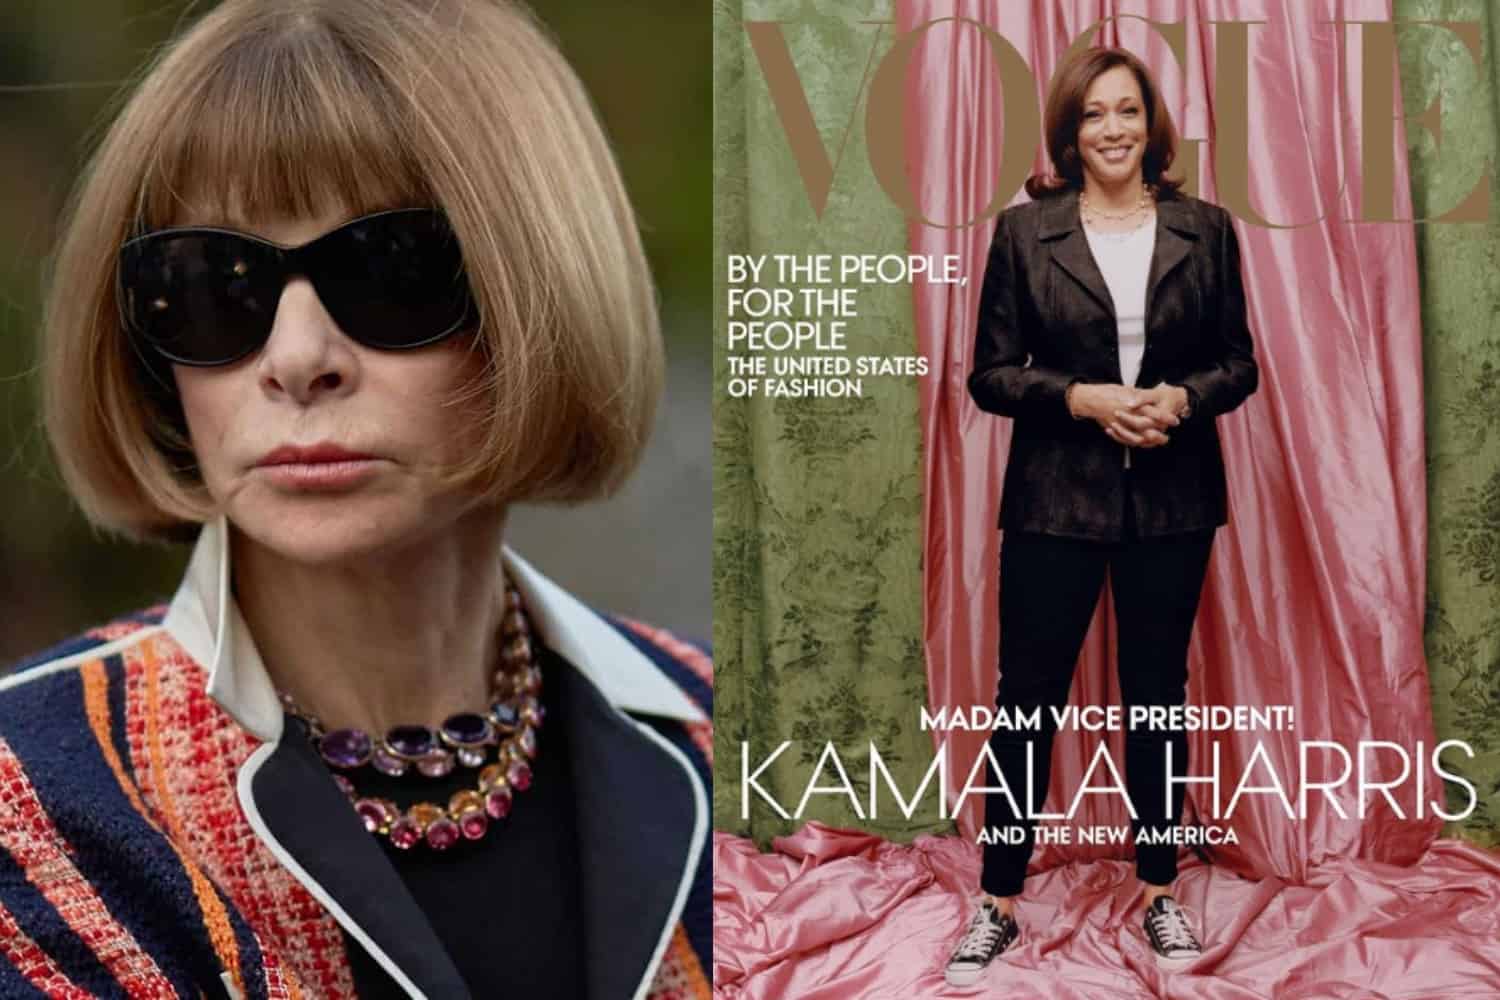 Anna Wintour Surprised At Cover Controversy: “We Want Nothing But